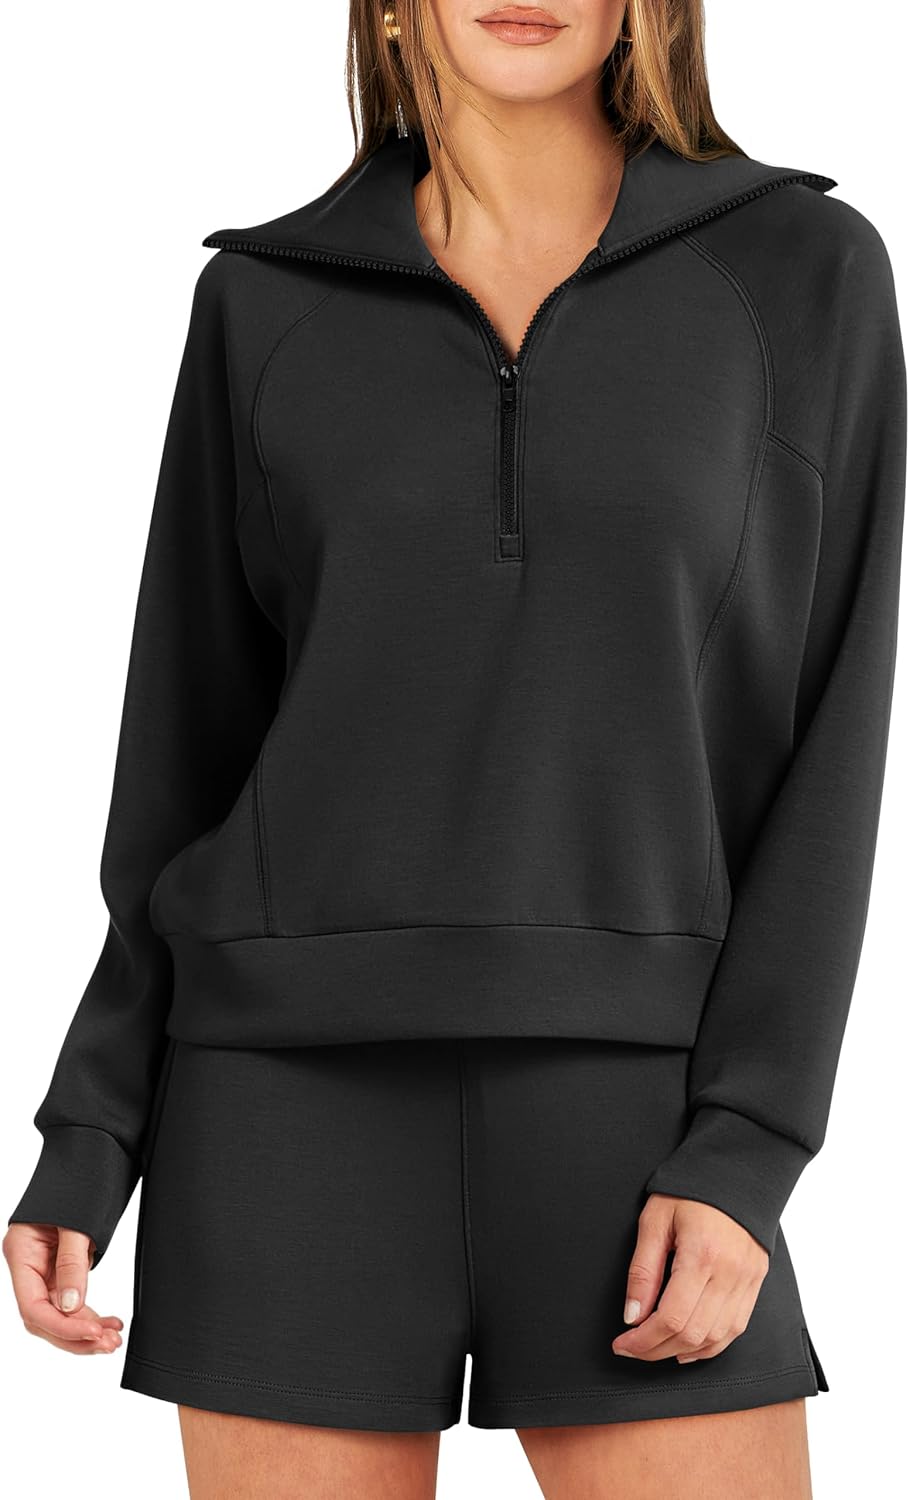 Save Big on Your Purchase! ANRABESS Womens 2 Piece Outfits Oversized Half Zip Sweat Suits Short Sets - Up to 50% Off!